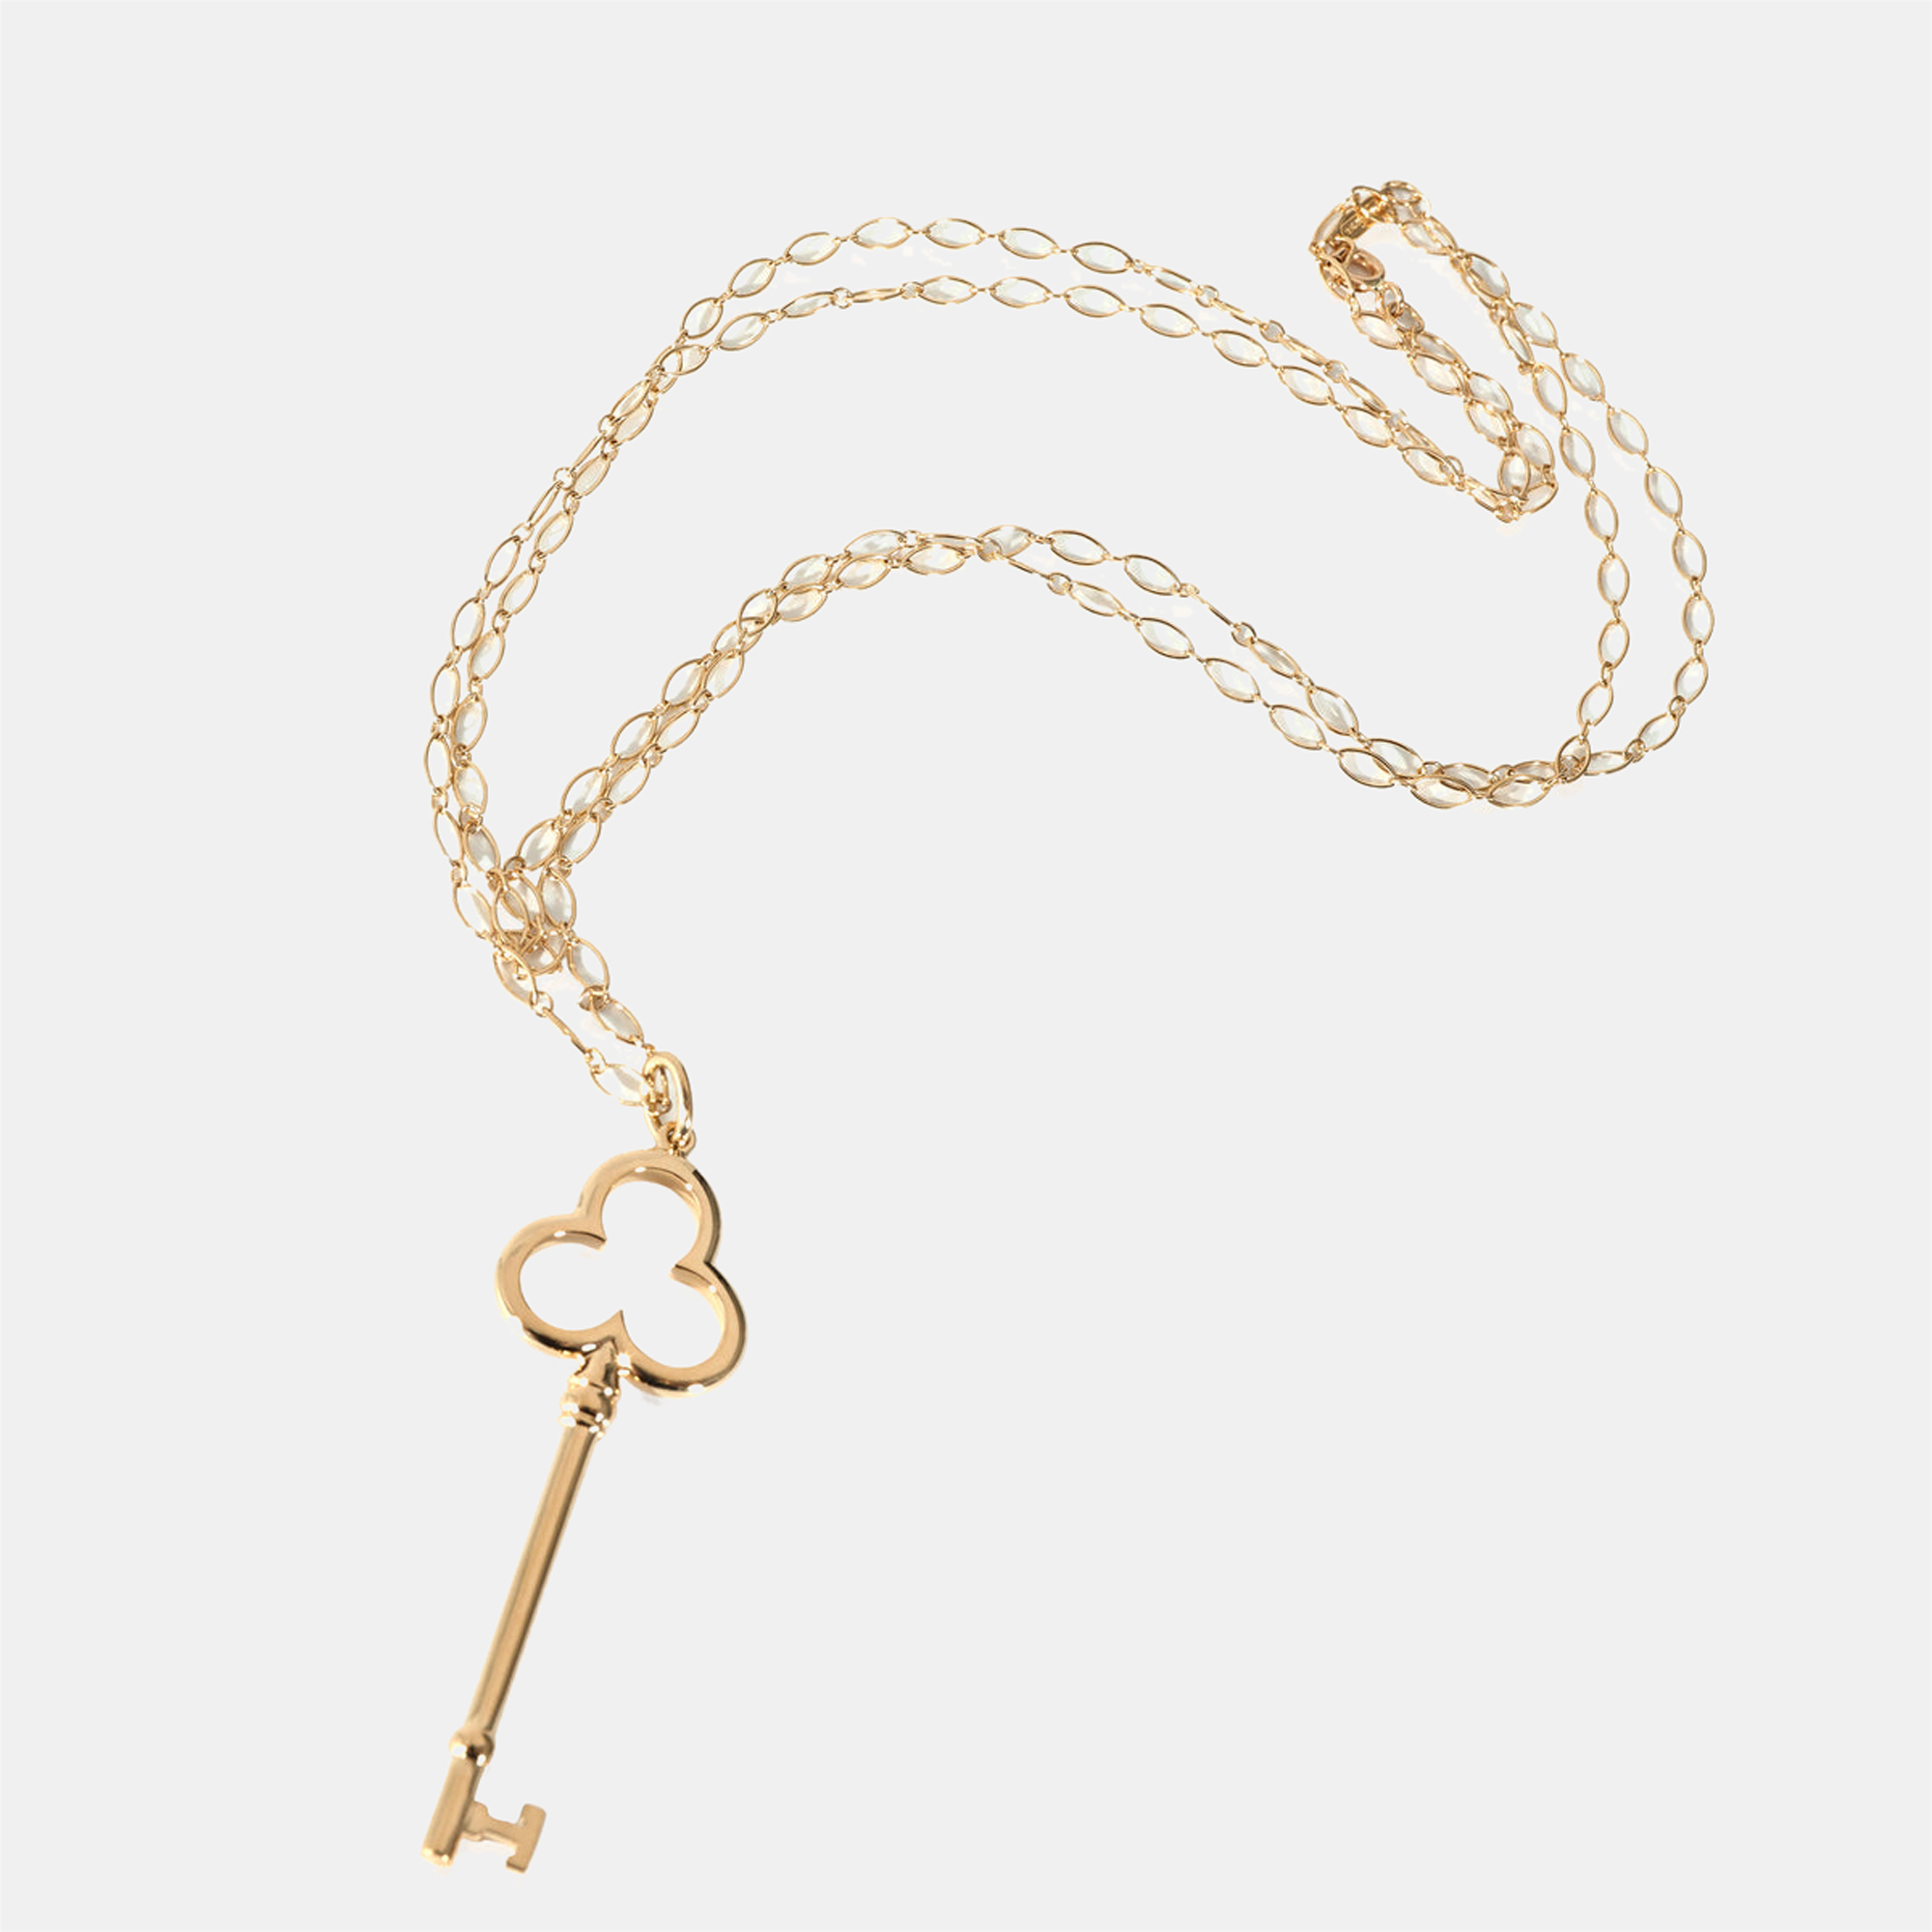 

Tiffany & Co. Trefoil Key Pendant Necklace in 18KT Yellow Gold